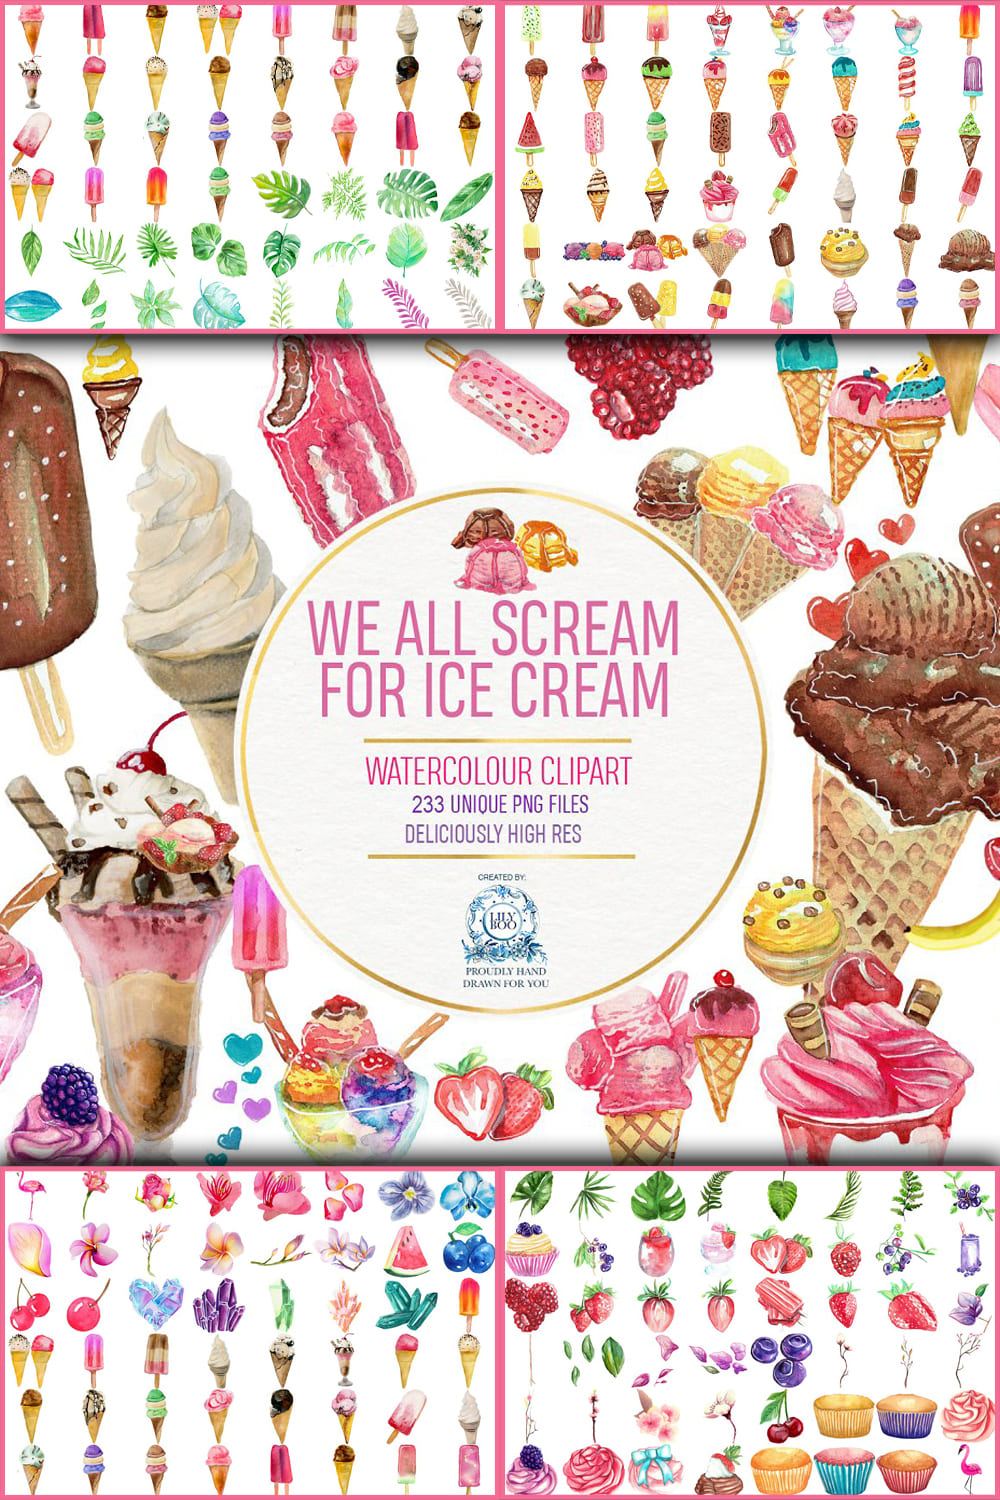 3194114 ice cream watercolor clipart 223 png pinterest 1000 1500 892